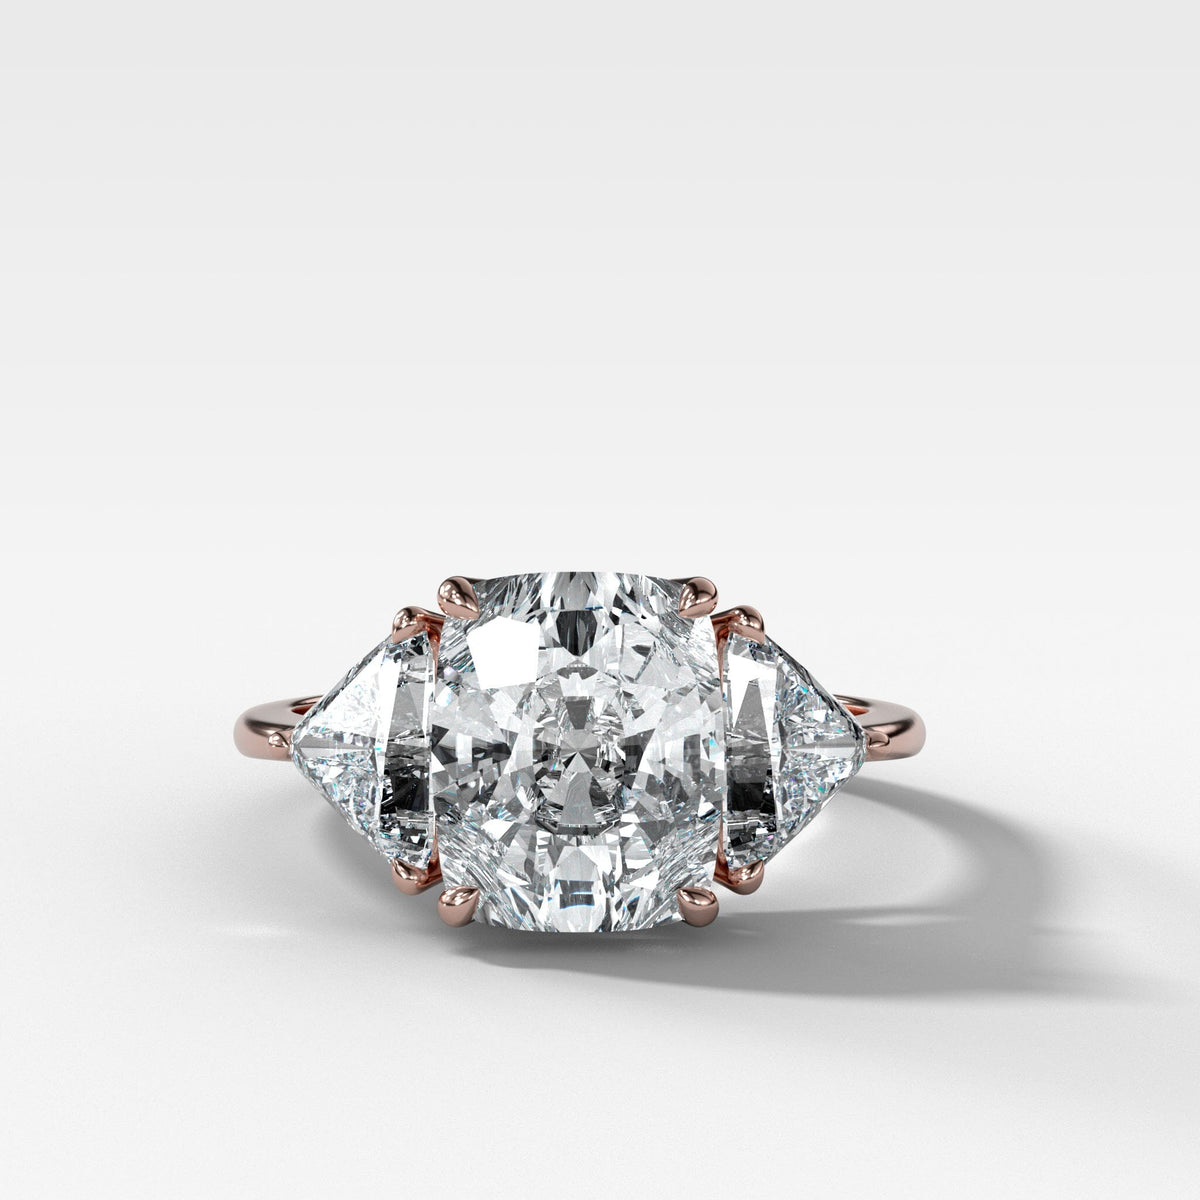 Signature Pavé Engagement Ring With Oval Cut Diamond - GOODSTONE